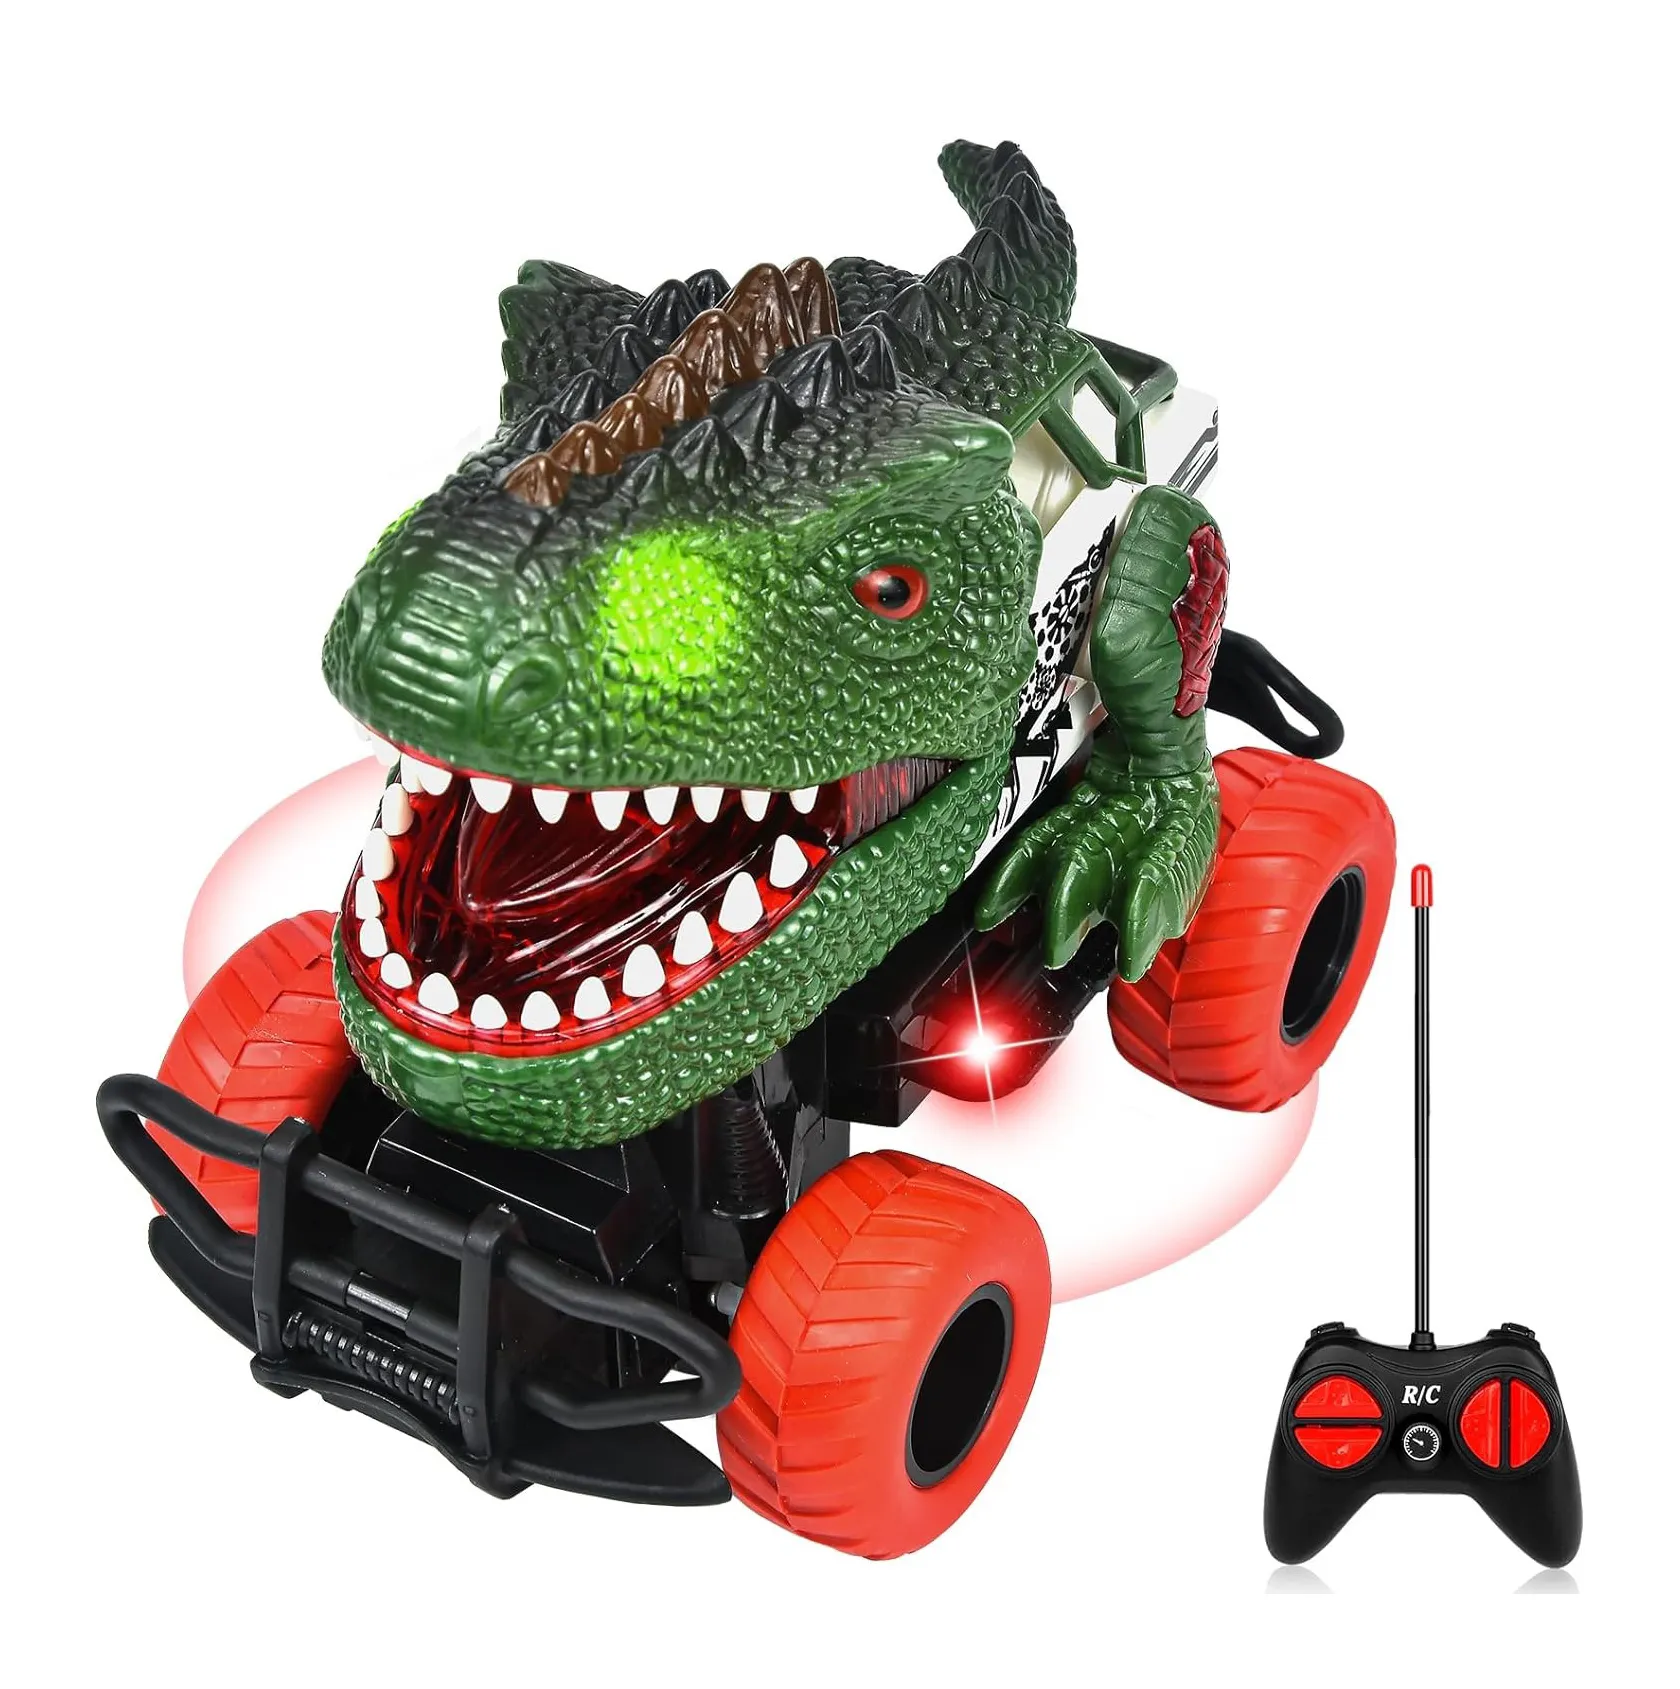 EPT Wholesale RC Car Toys 1:34 4 Channels Silding Speed Dinosaur Remote Control Toys Car for Toddlers